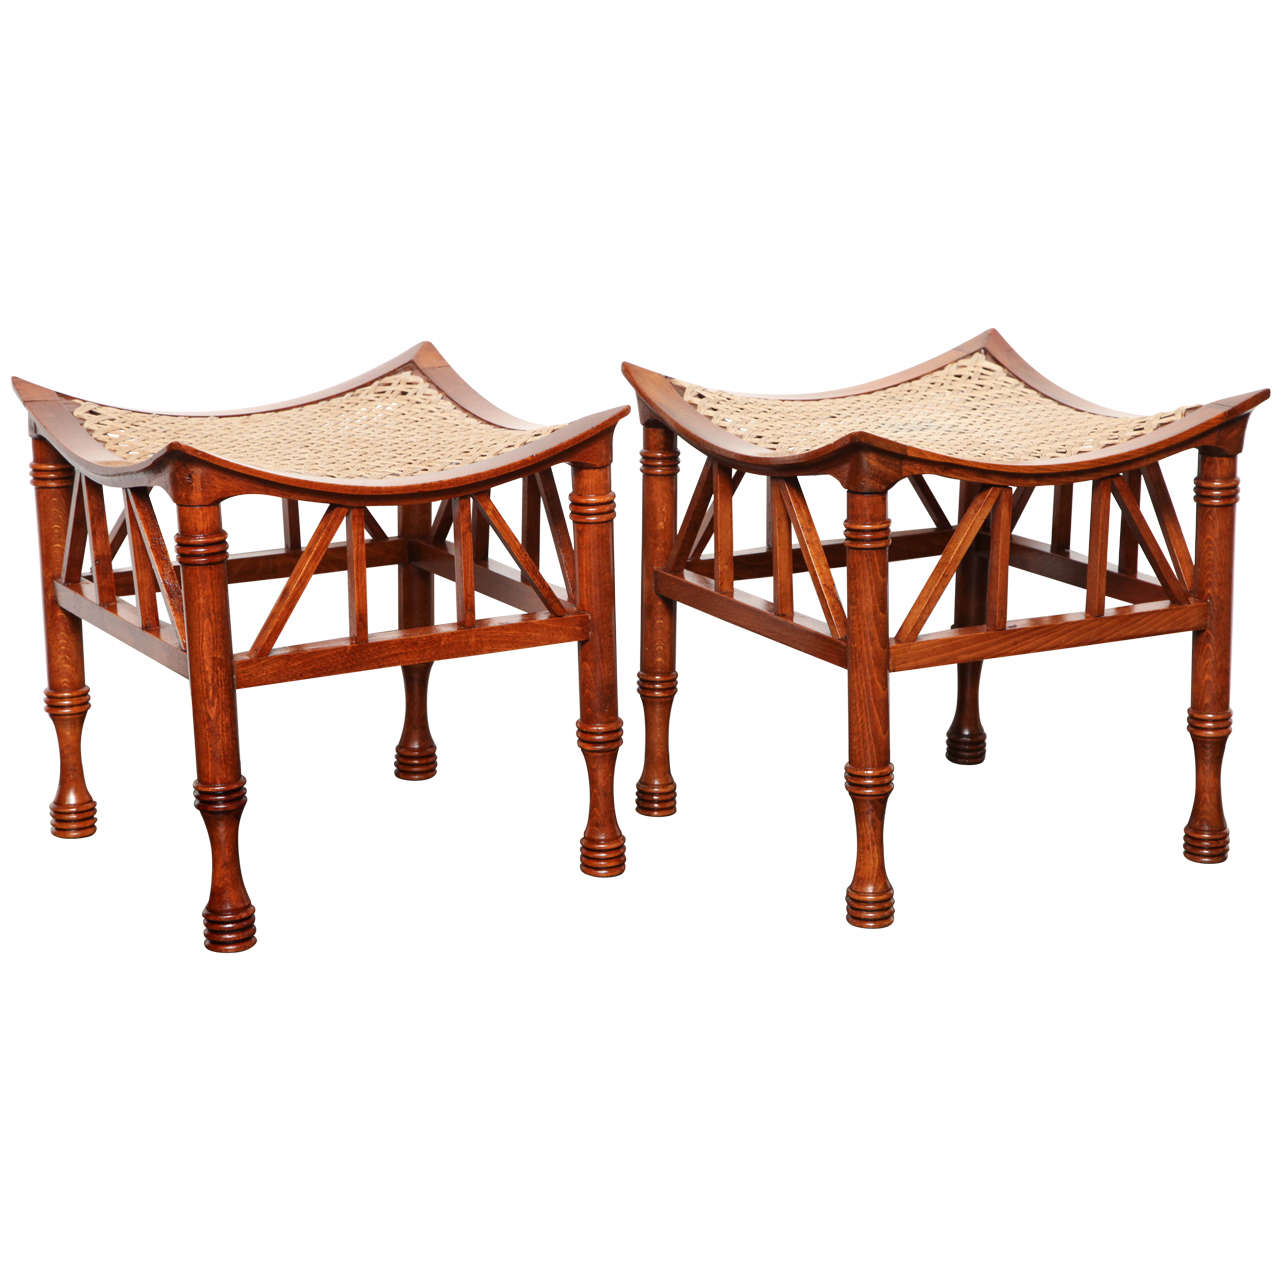 Pair of Thebes Stools in the Liberty Taste, circa 1910